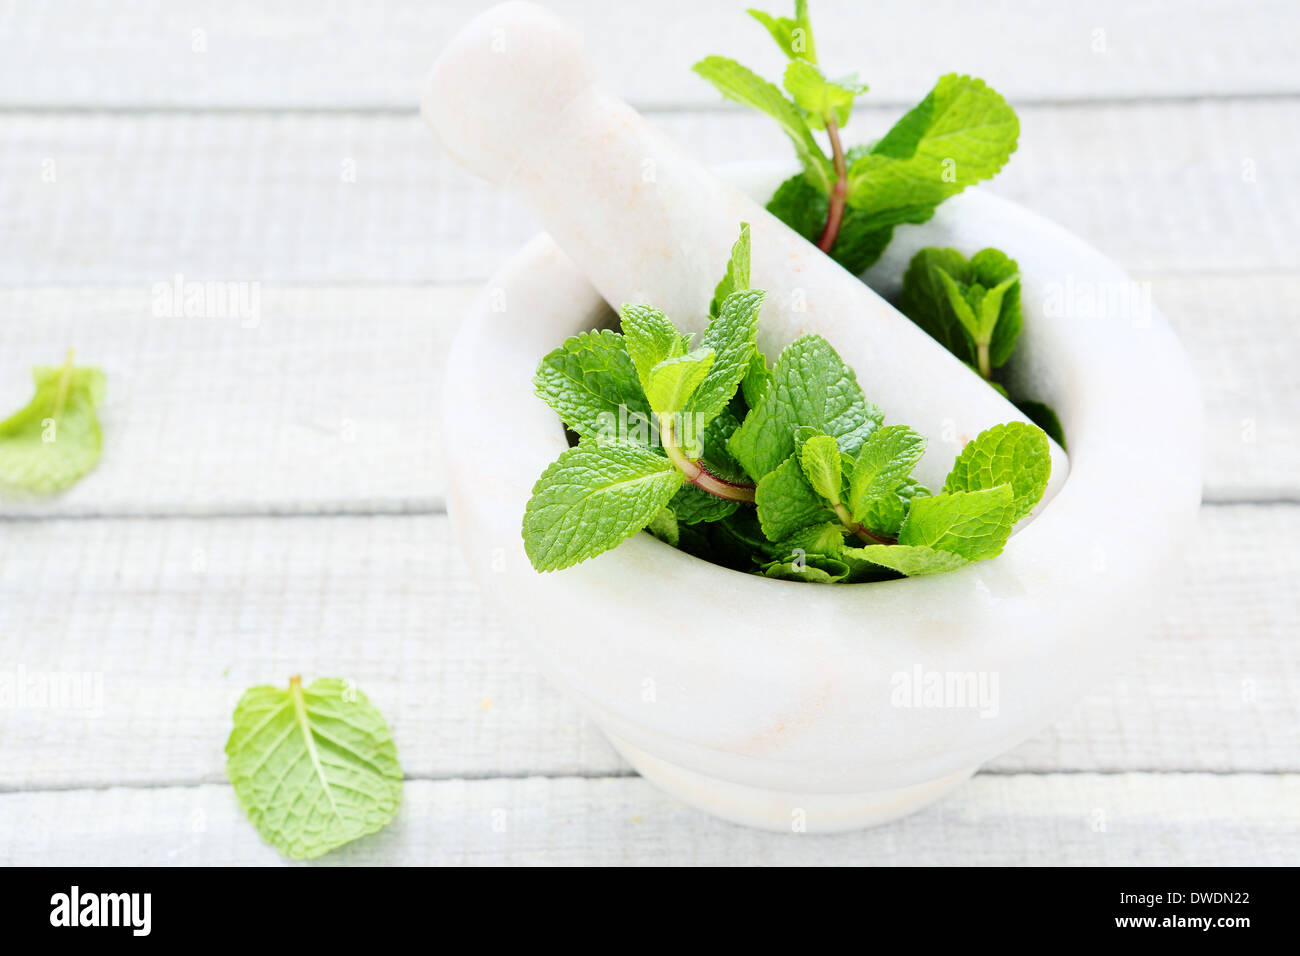 fresh green mint and mortar, herbs Stock Photo